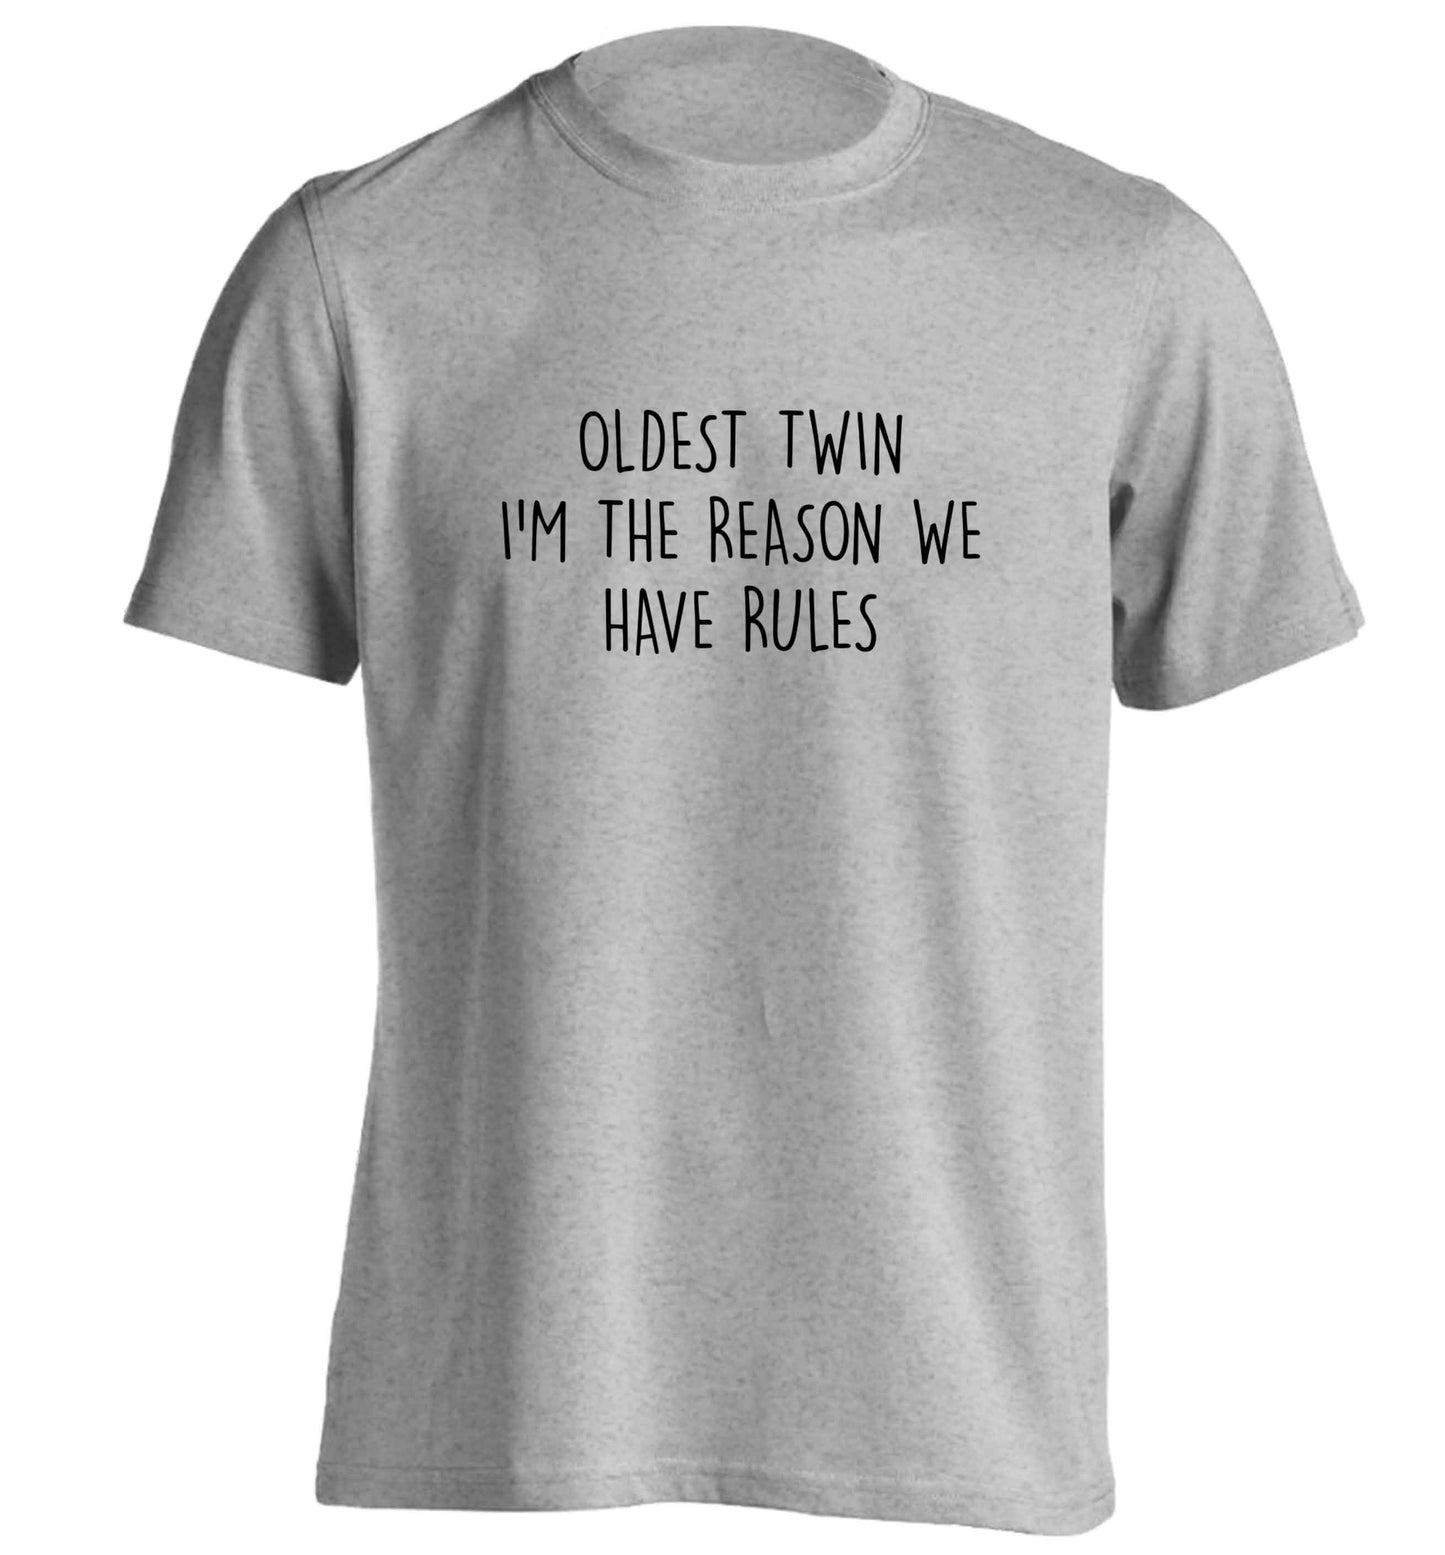 Oldest twin I'm the reason we have rules adults unisex grey Tshirt 2XL